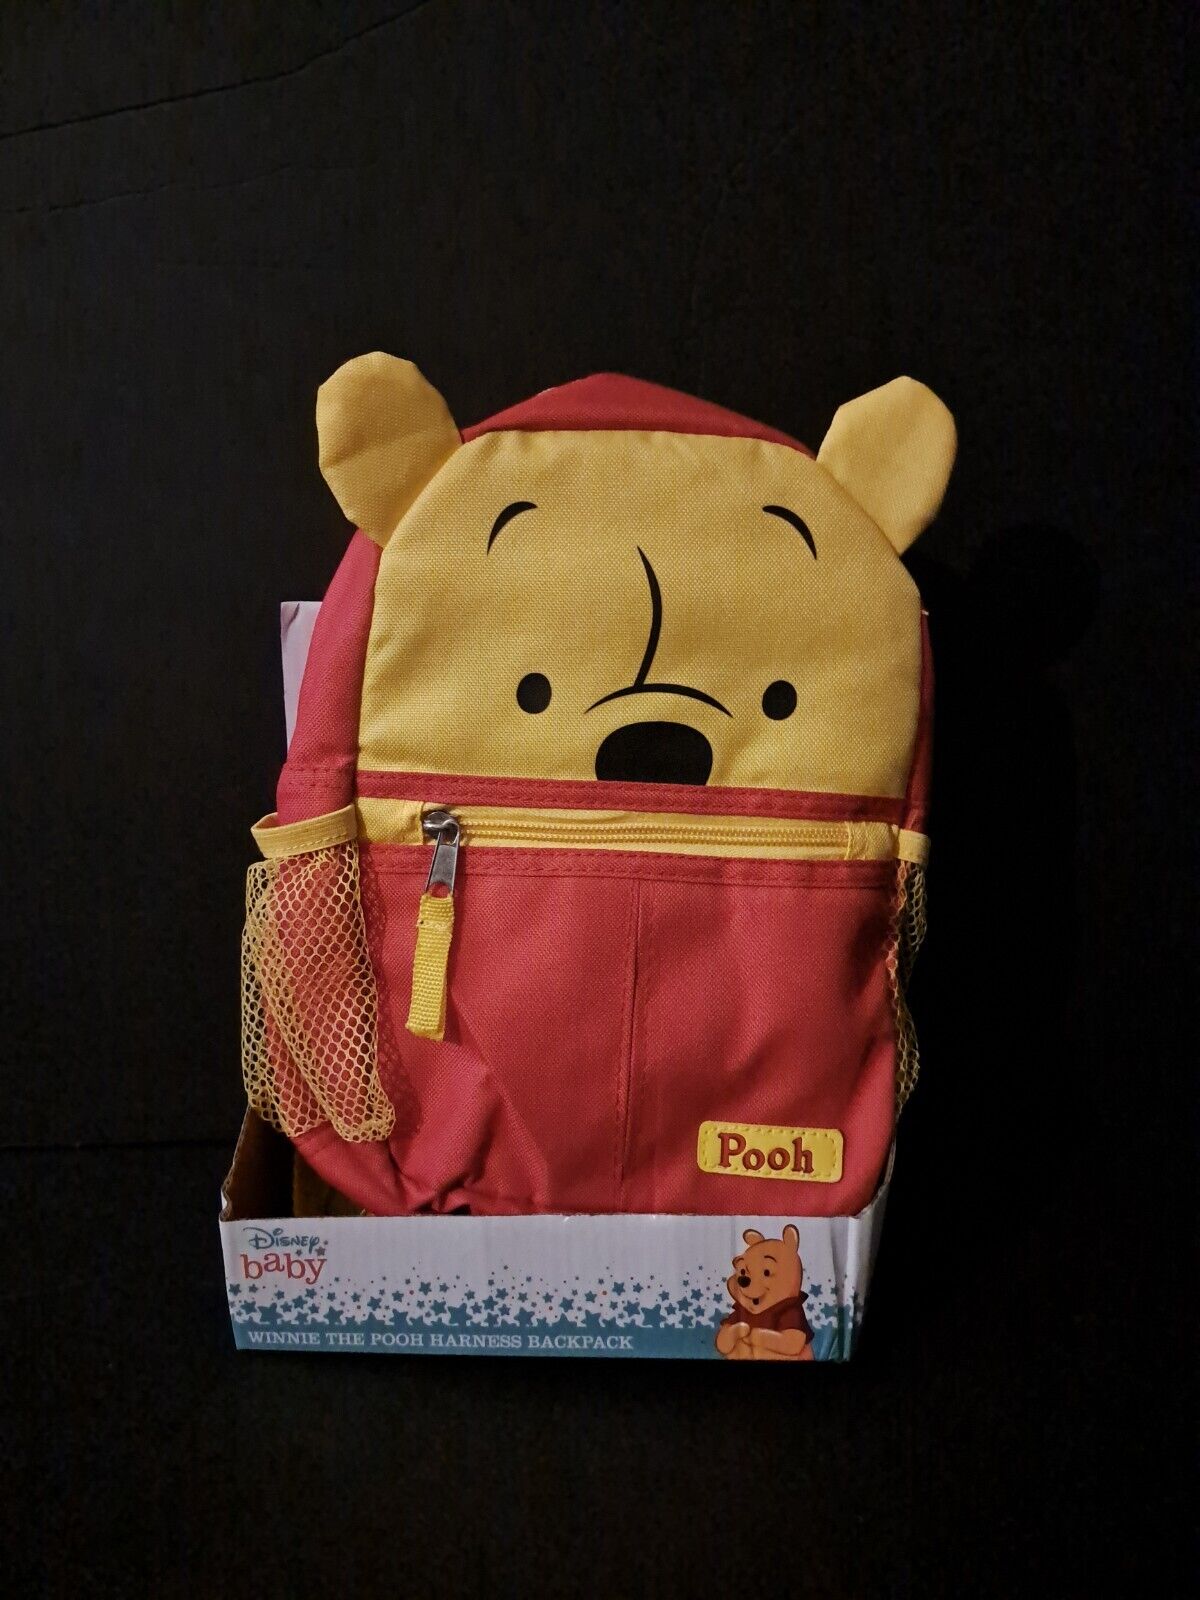 Disney Baby Winnie The Pooh Harness Backpack